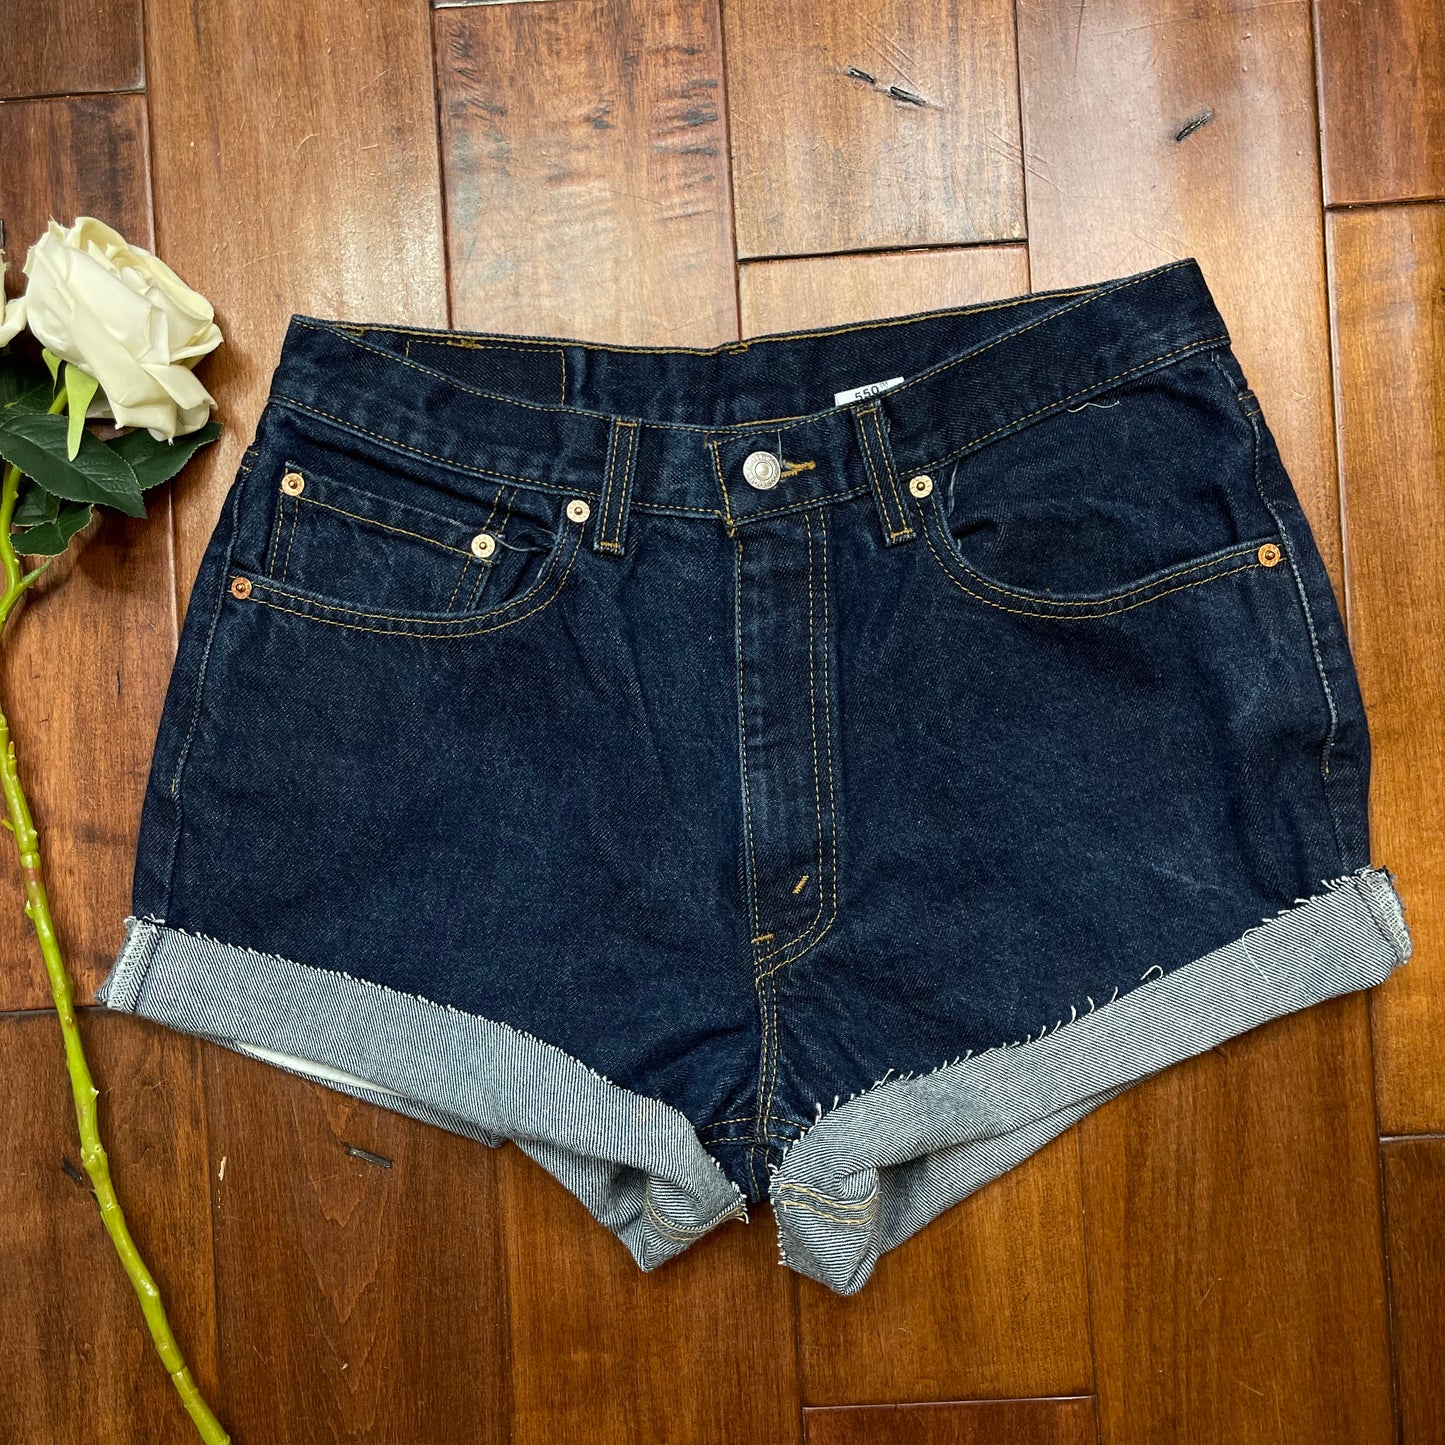 VINTAGE LEVIS HIGH-WAISTED SHORTS